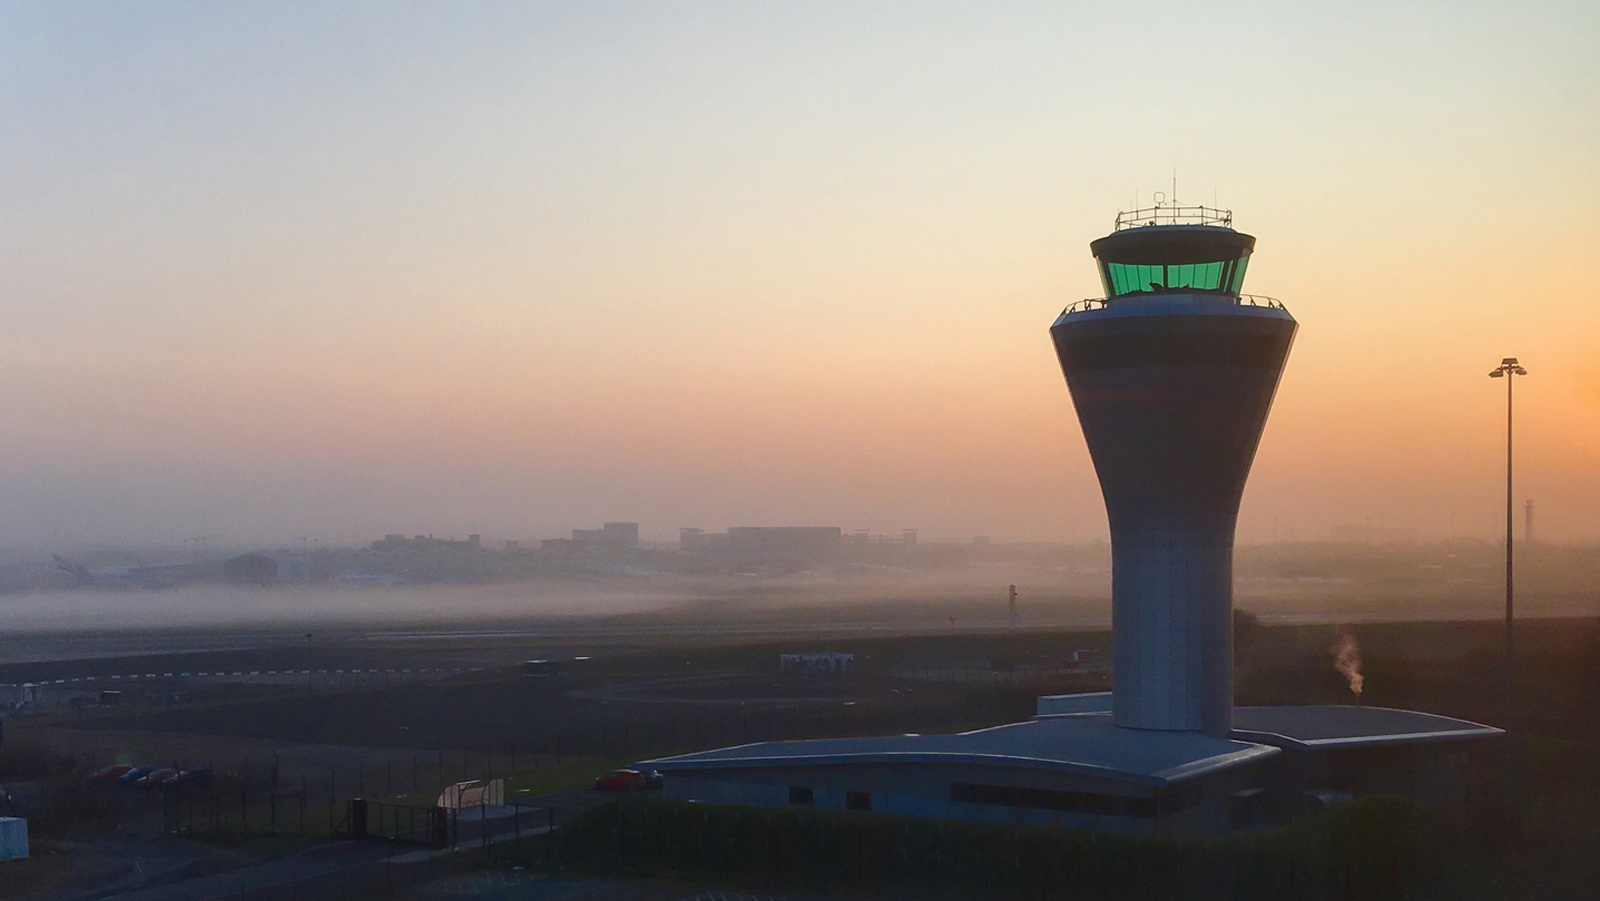 Bad data from a single flight caused August’s air traffic control meltdown, report finds